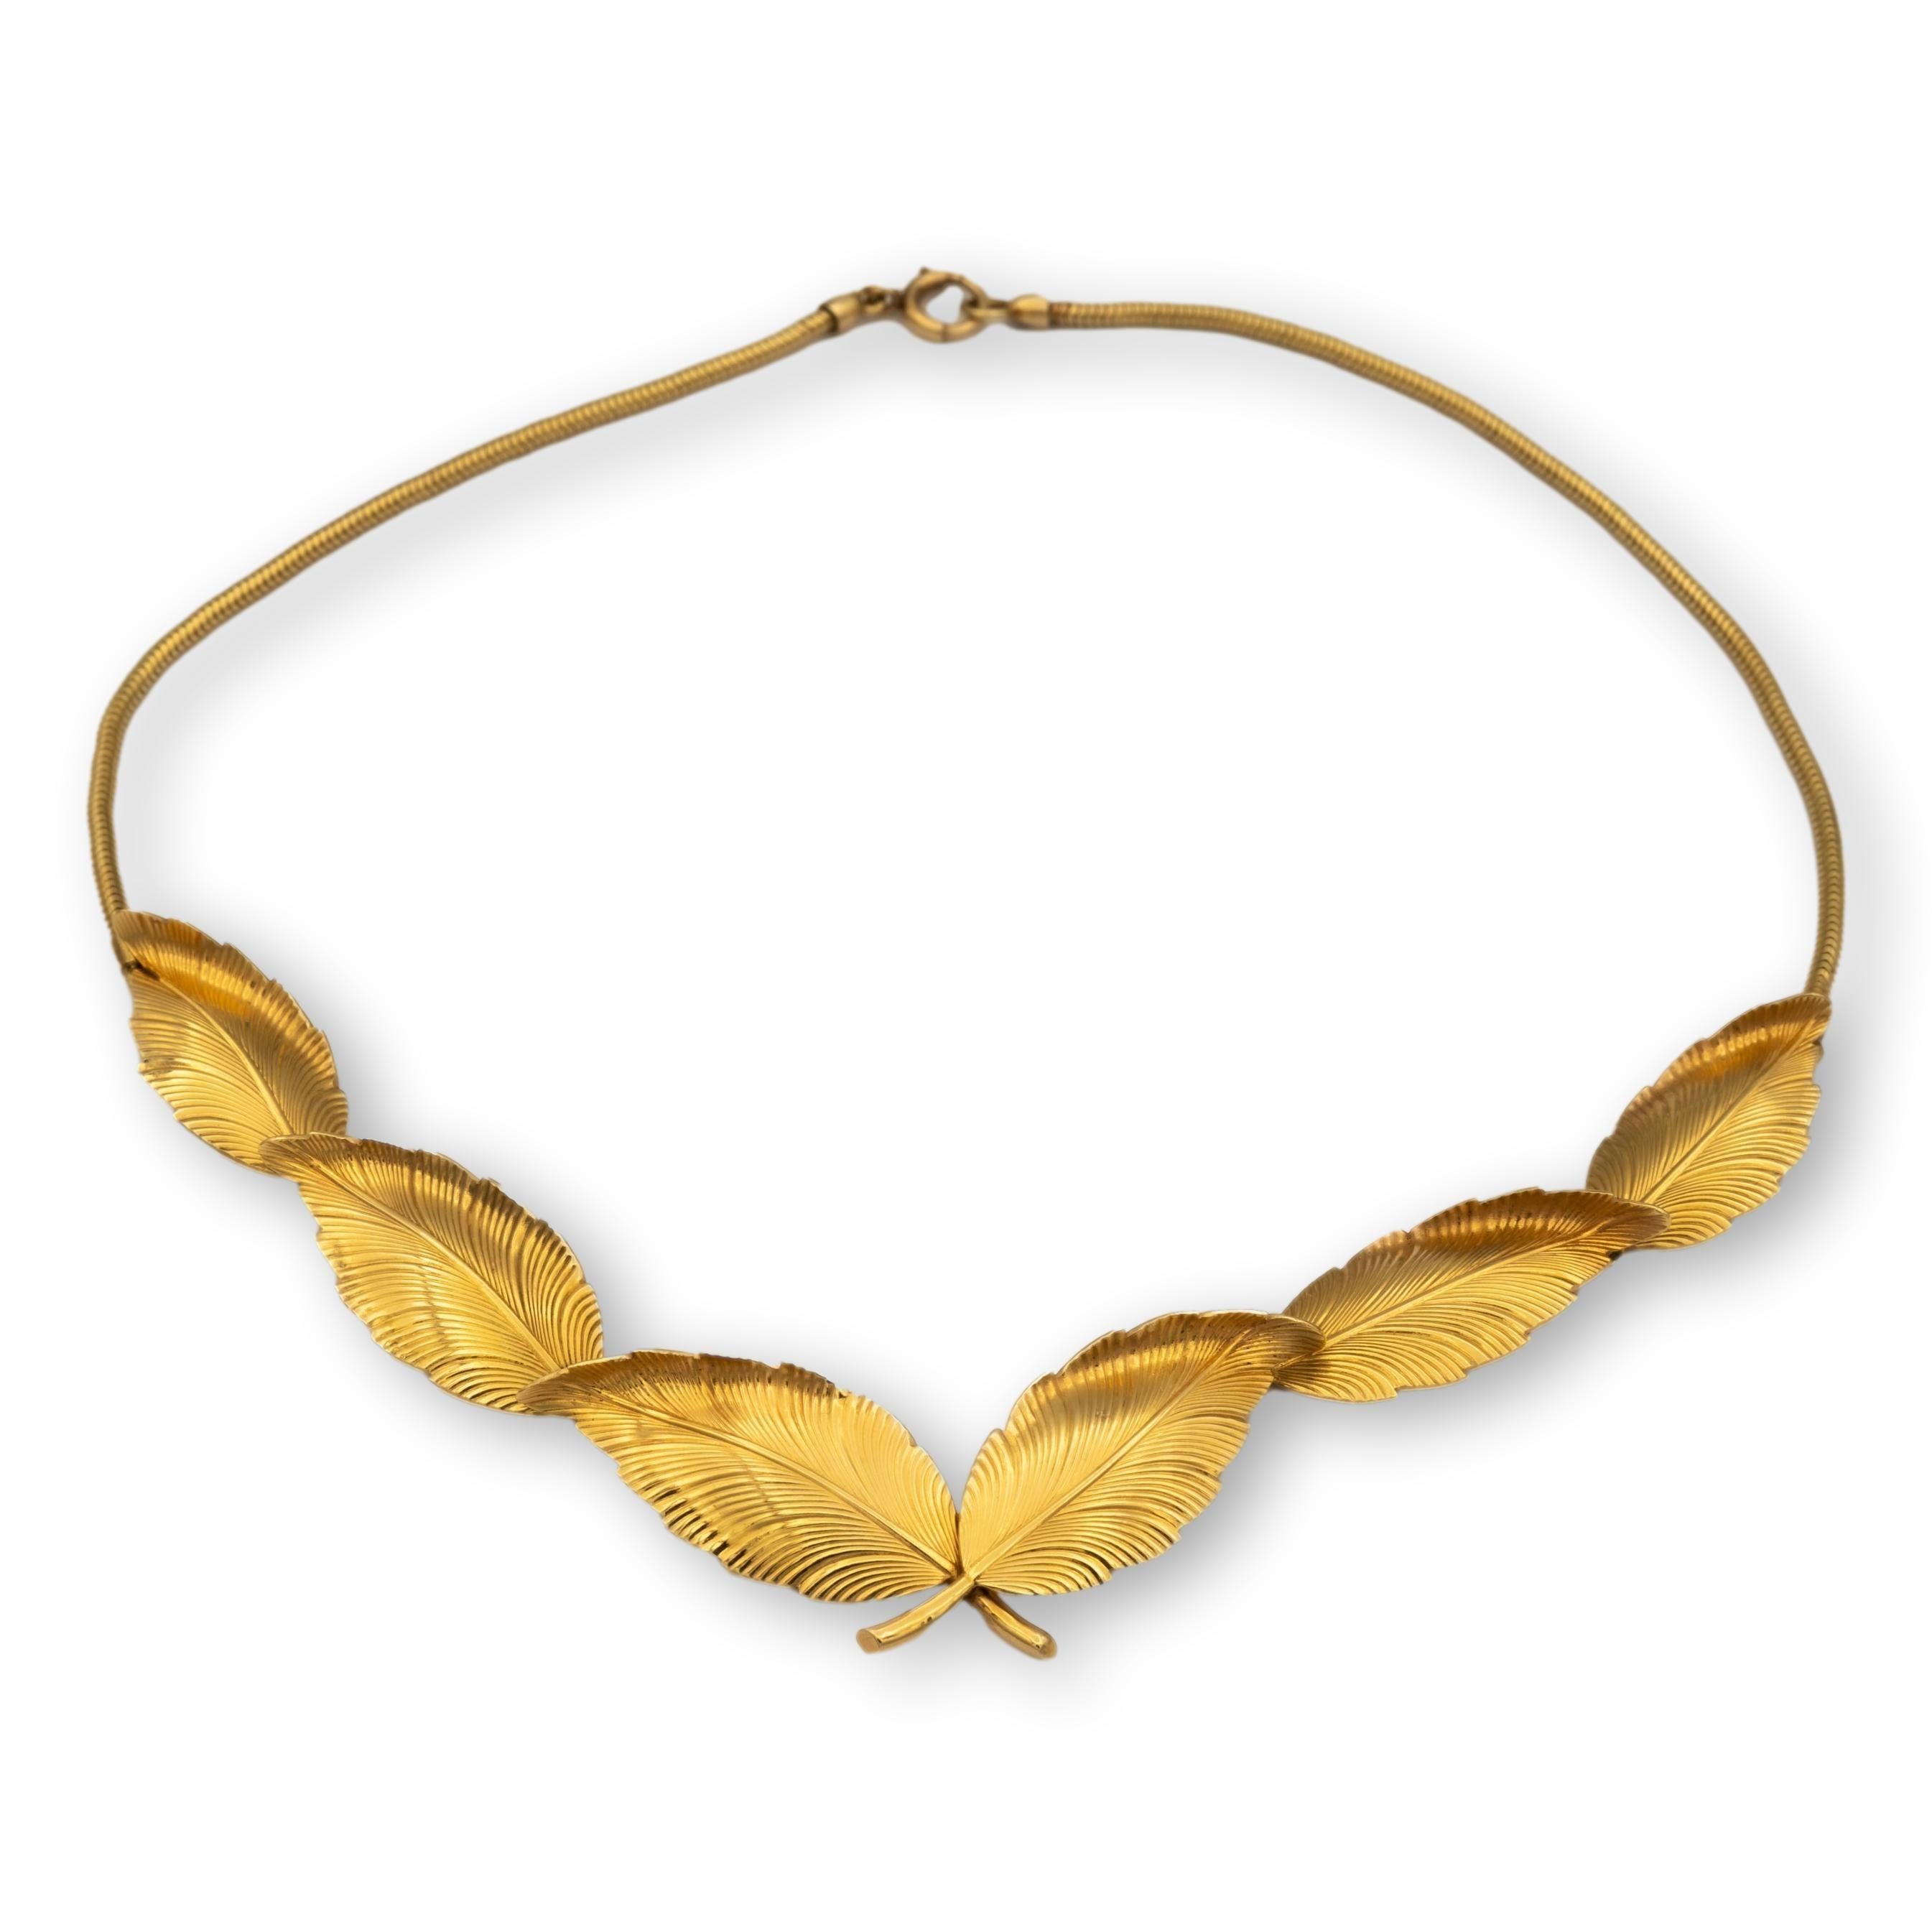 Retro Tiffany & Co. 14k Yellow Gold Vintage Leaf Motif Choker and Earrings Suite circa